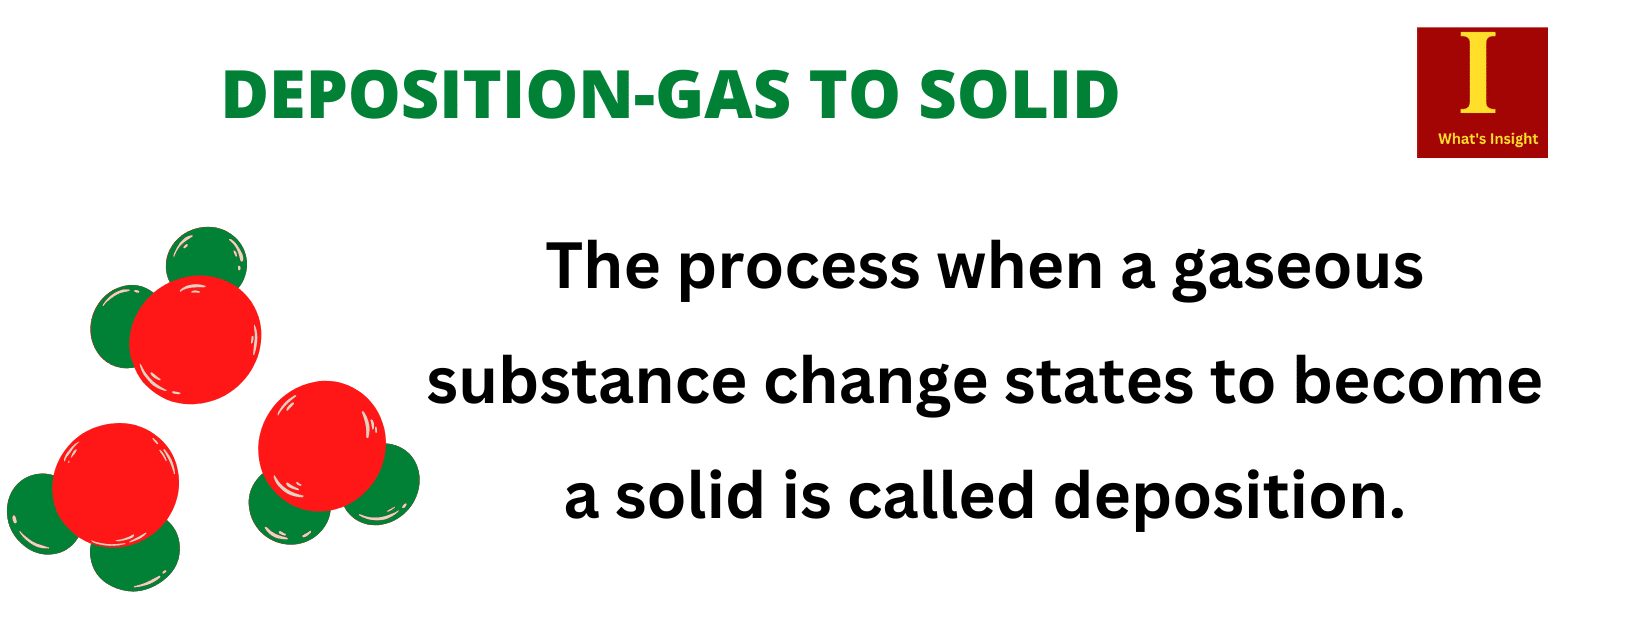 gas-to-solid-examples-deposition